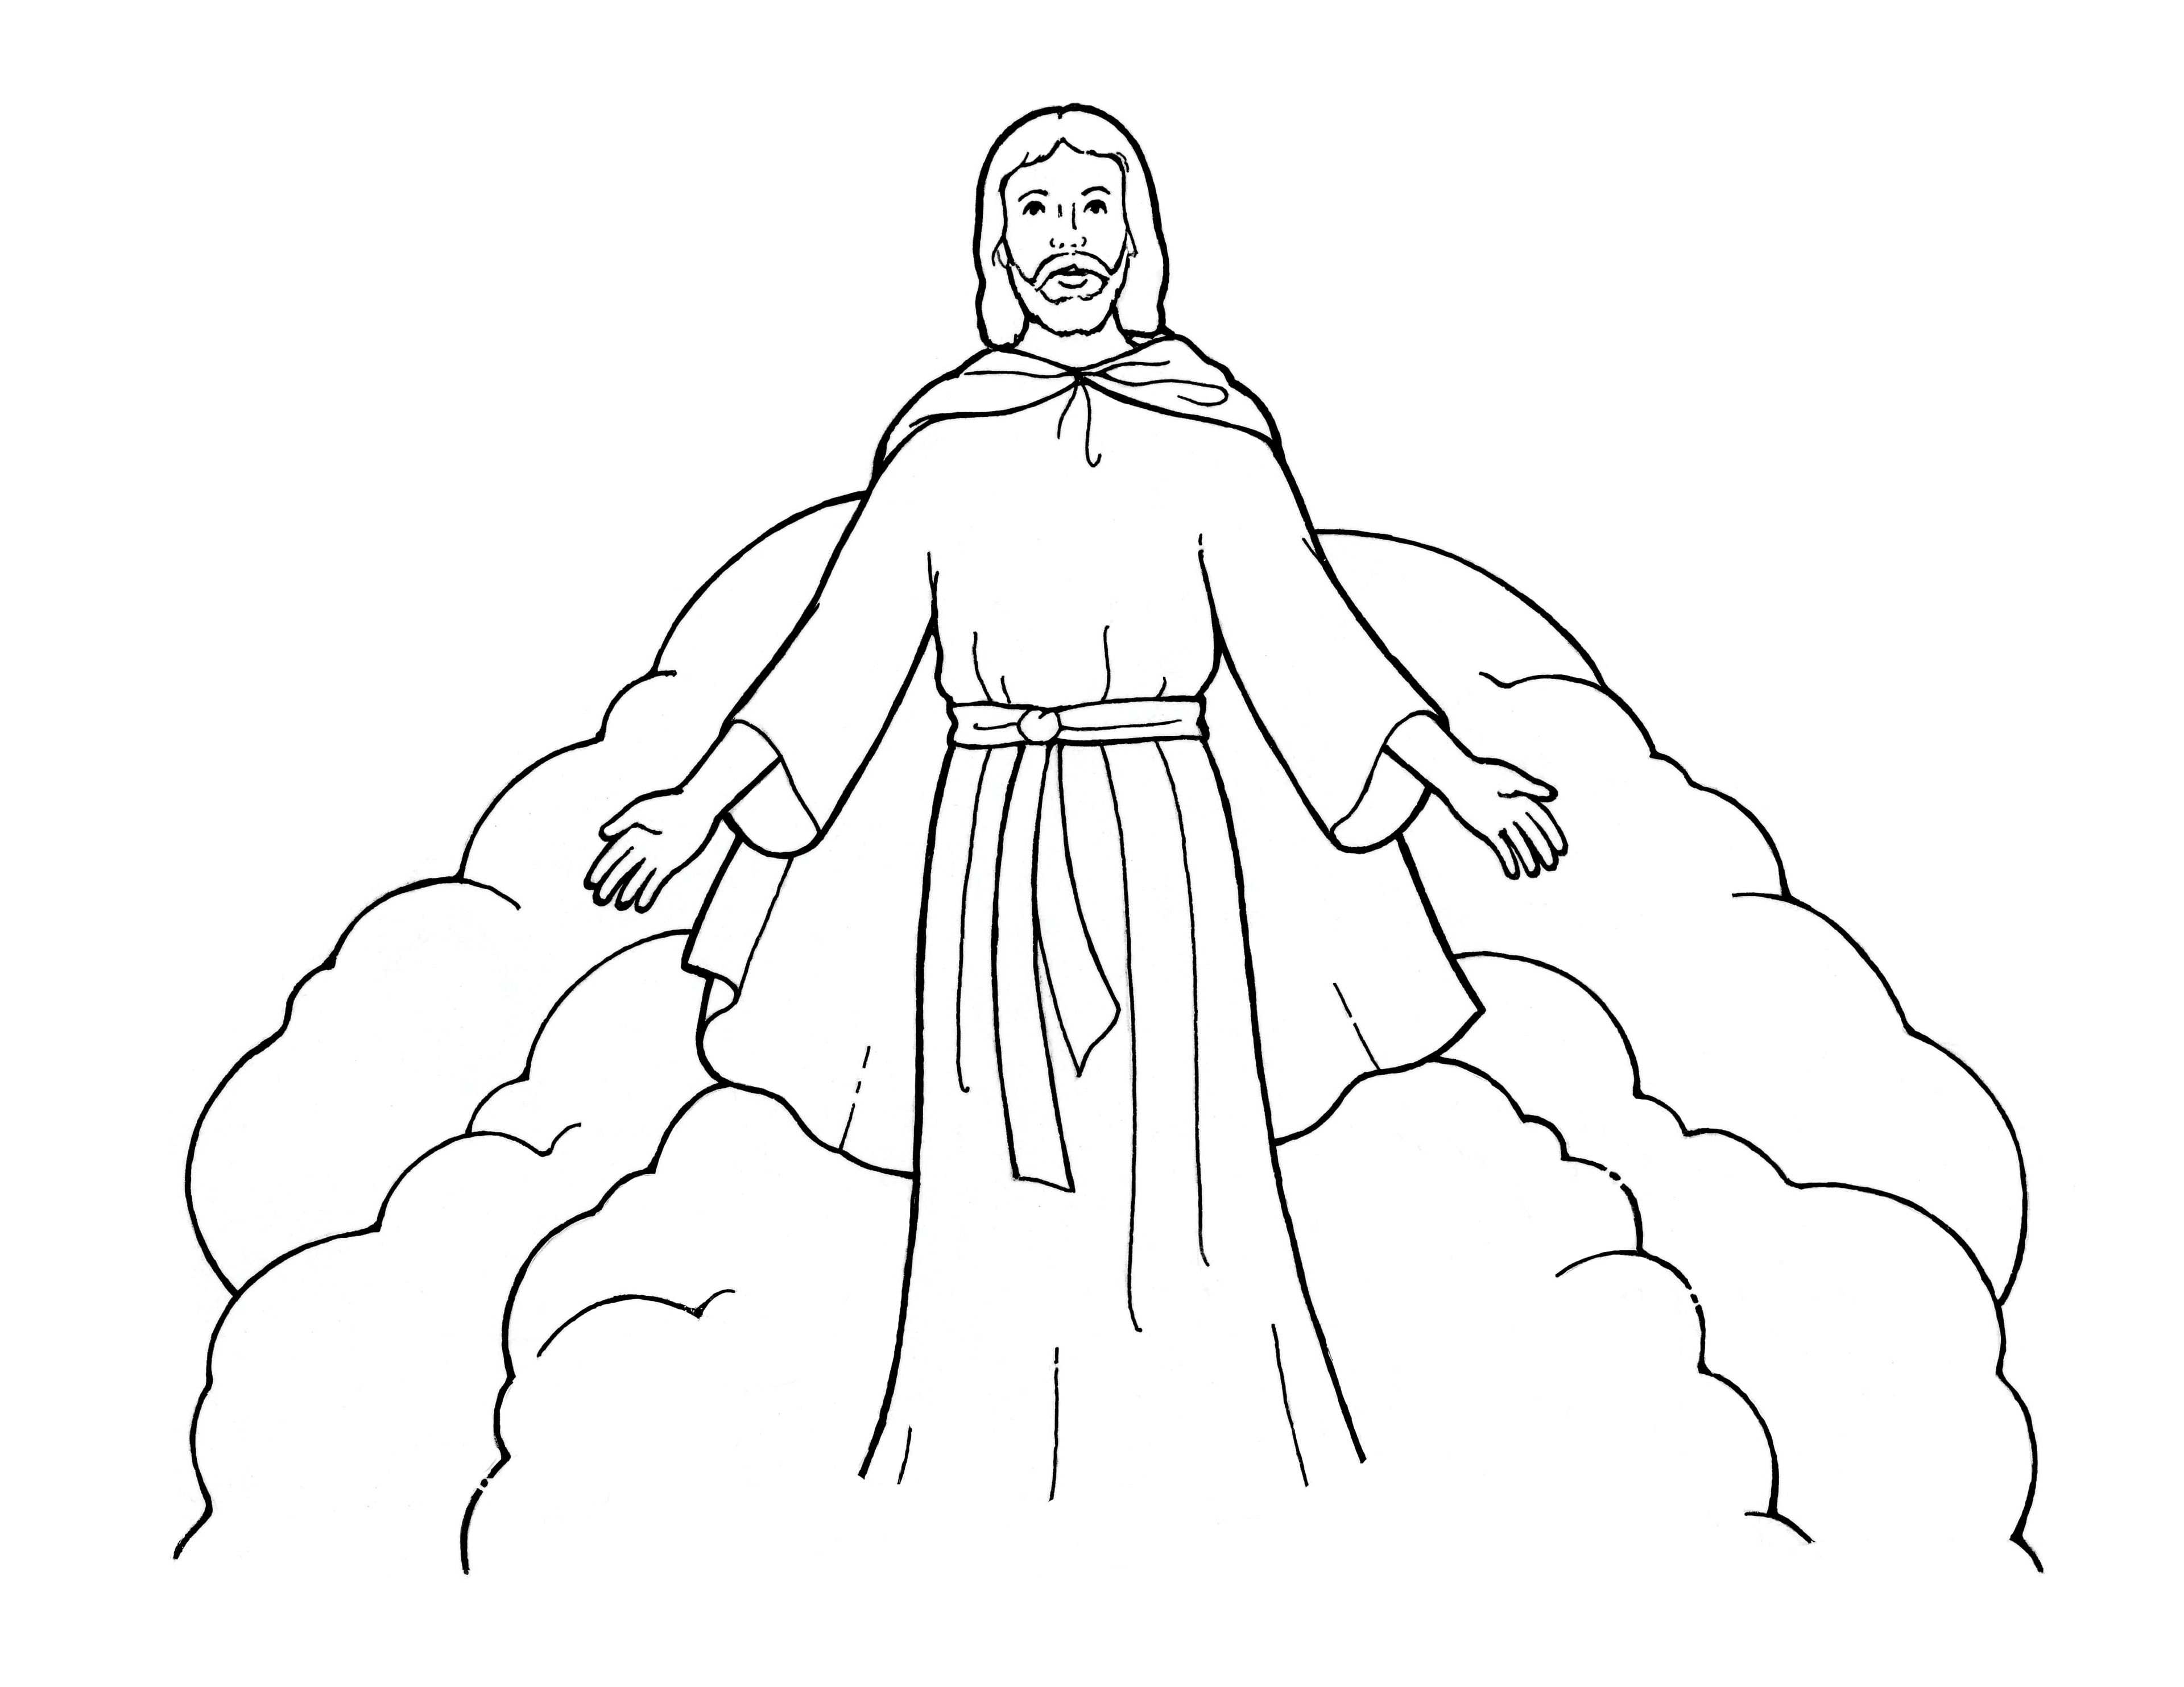 An illustration of Jesus Christ during the Second Coming.